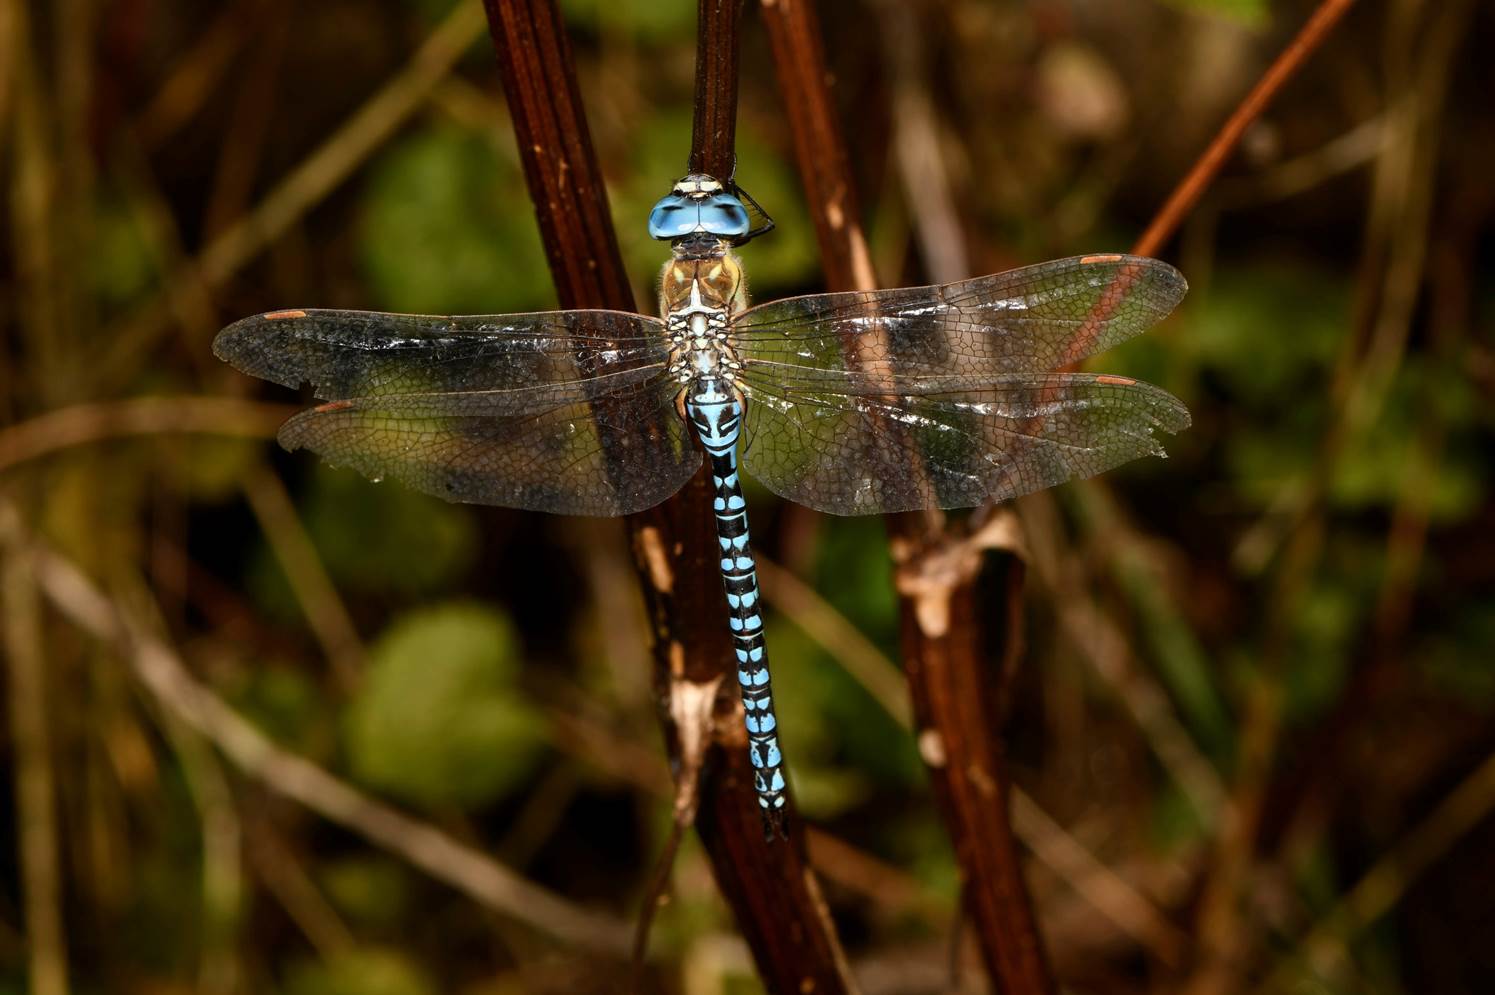 A dragonfly on a branch

Description automatically generated